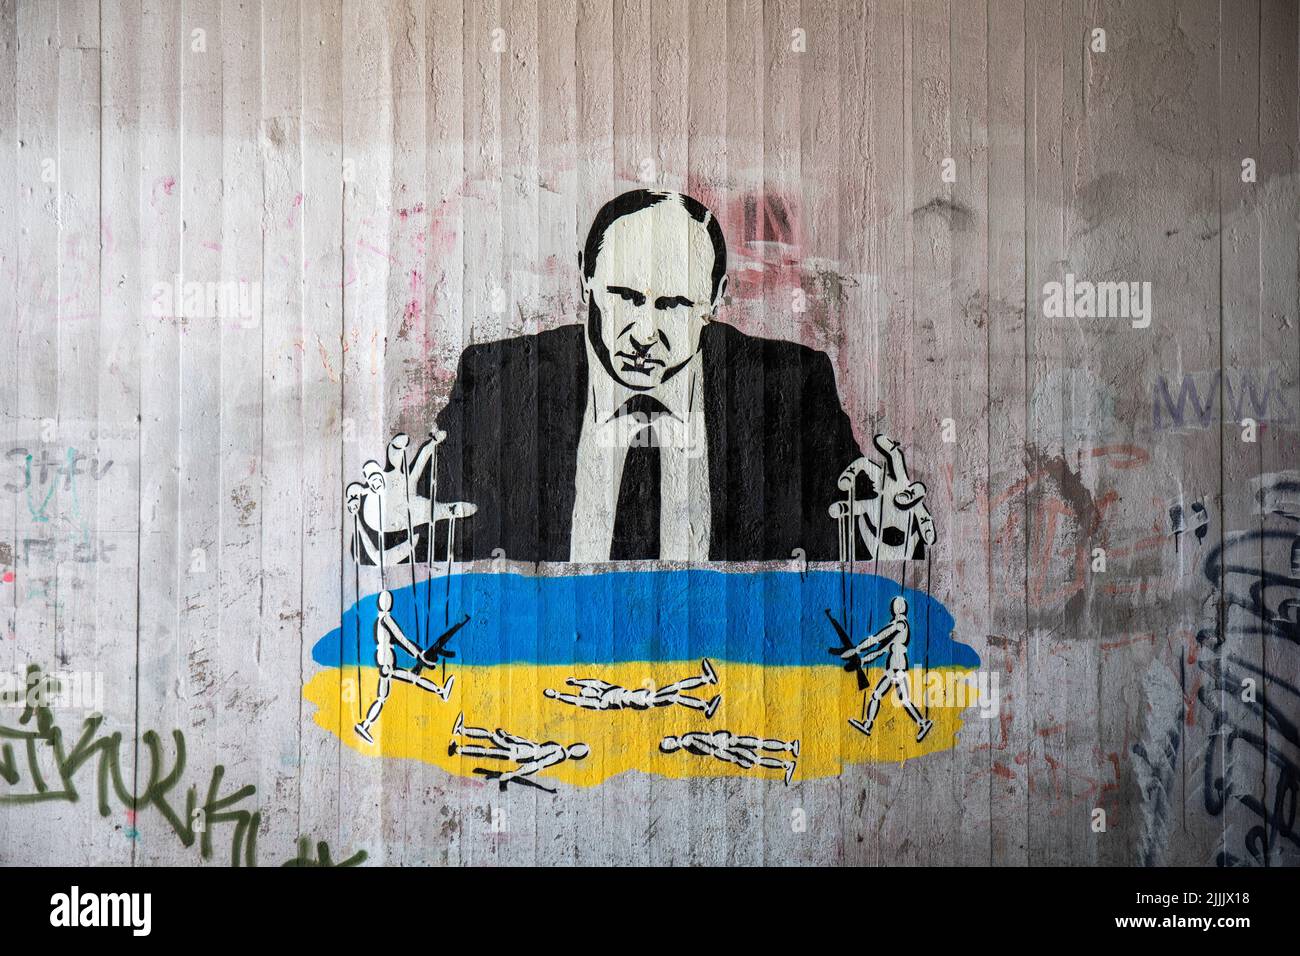 Street art for editorial use only. Mural graffiti or stencil graffiti of Putin as a puppet master by Plan B. Helsinki, Finland. Stock Photo